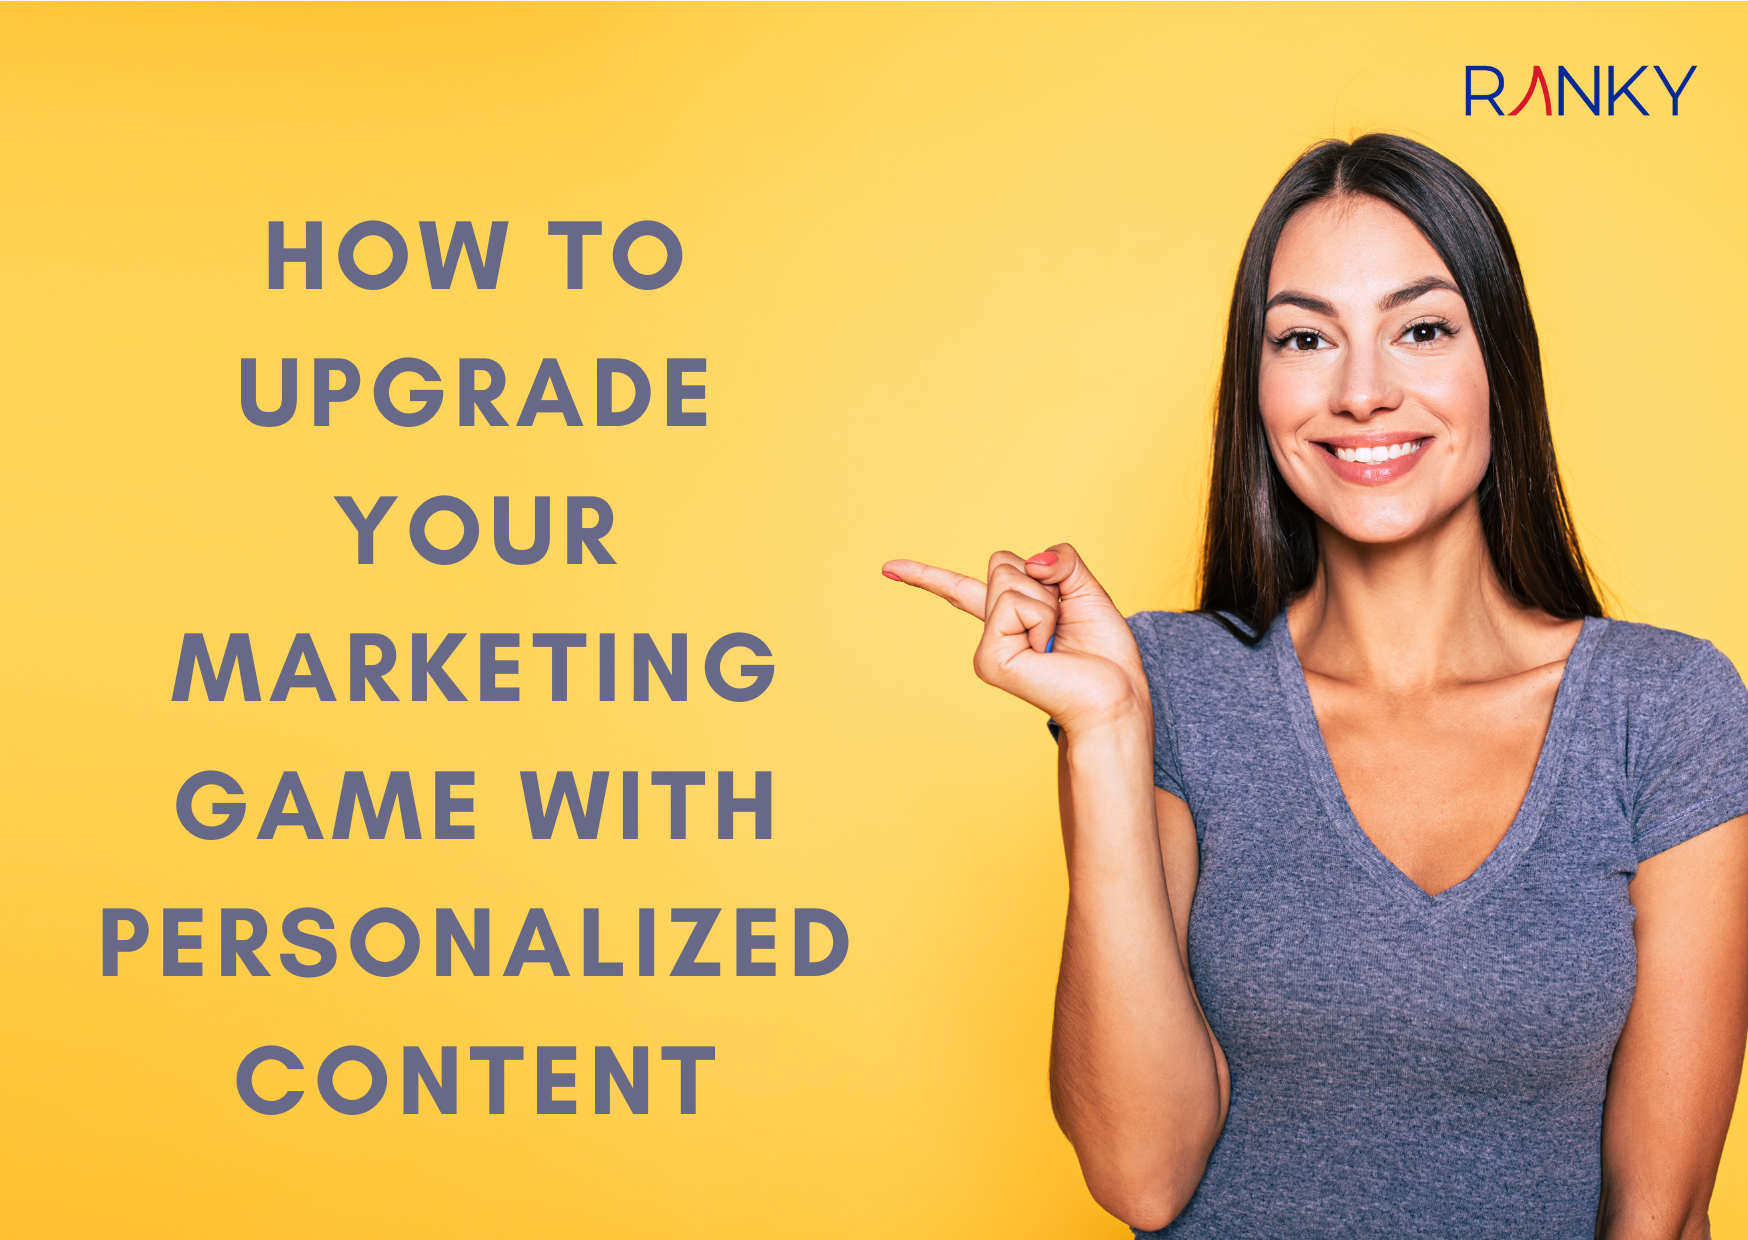 How to Upgrade Your Marketing Game With Personalized Content